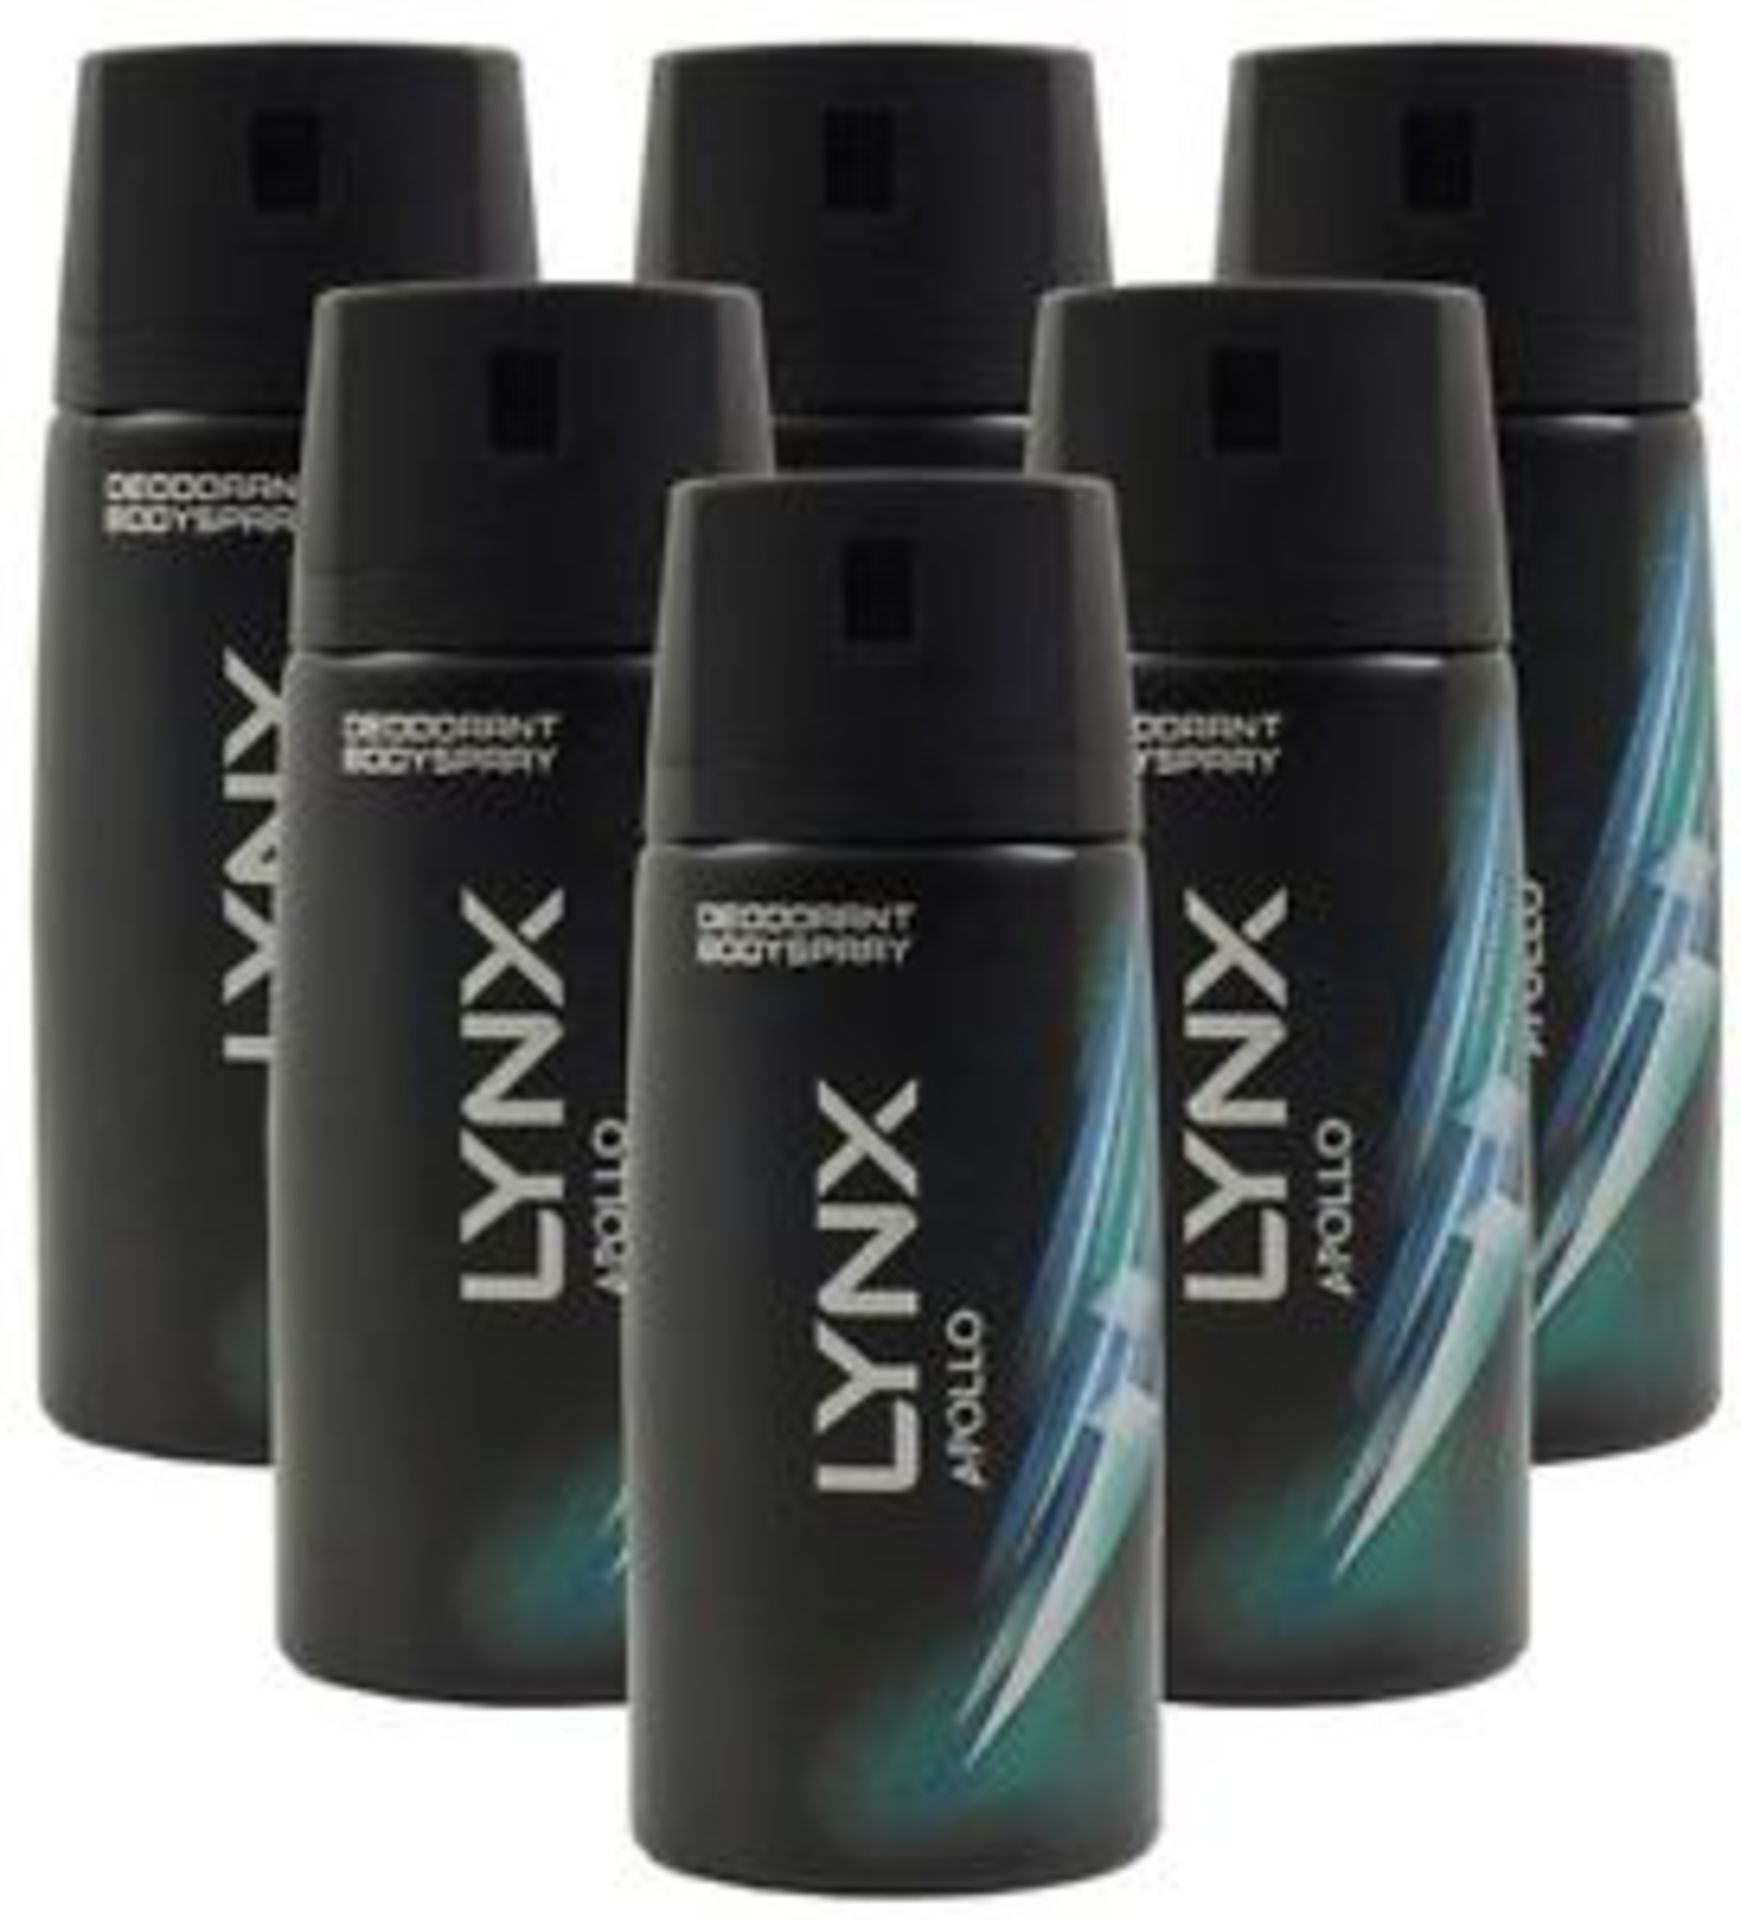 V Brand New 6 x Lynx (Axe) Apollo Deodorant Body Spray 150ml Total ISP For 6 £16.74 (Picture shows